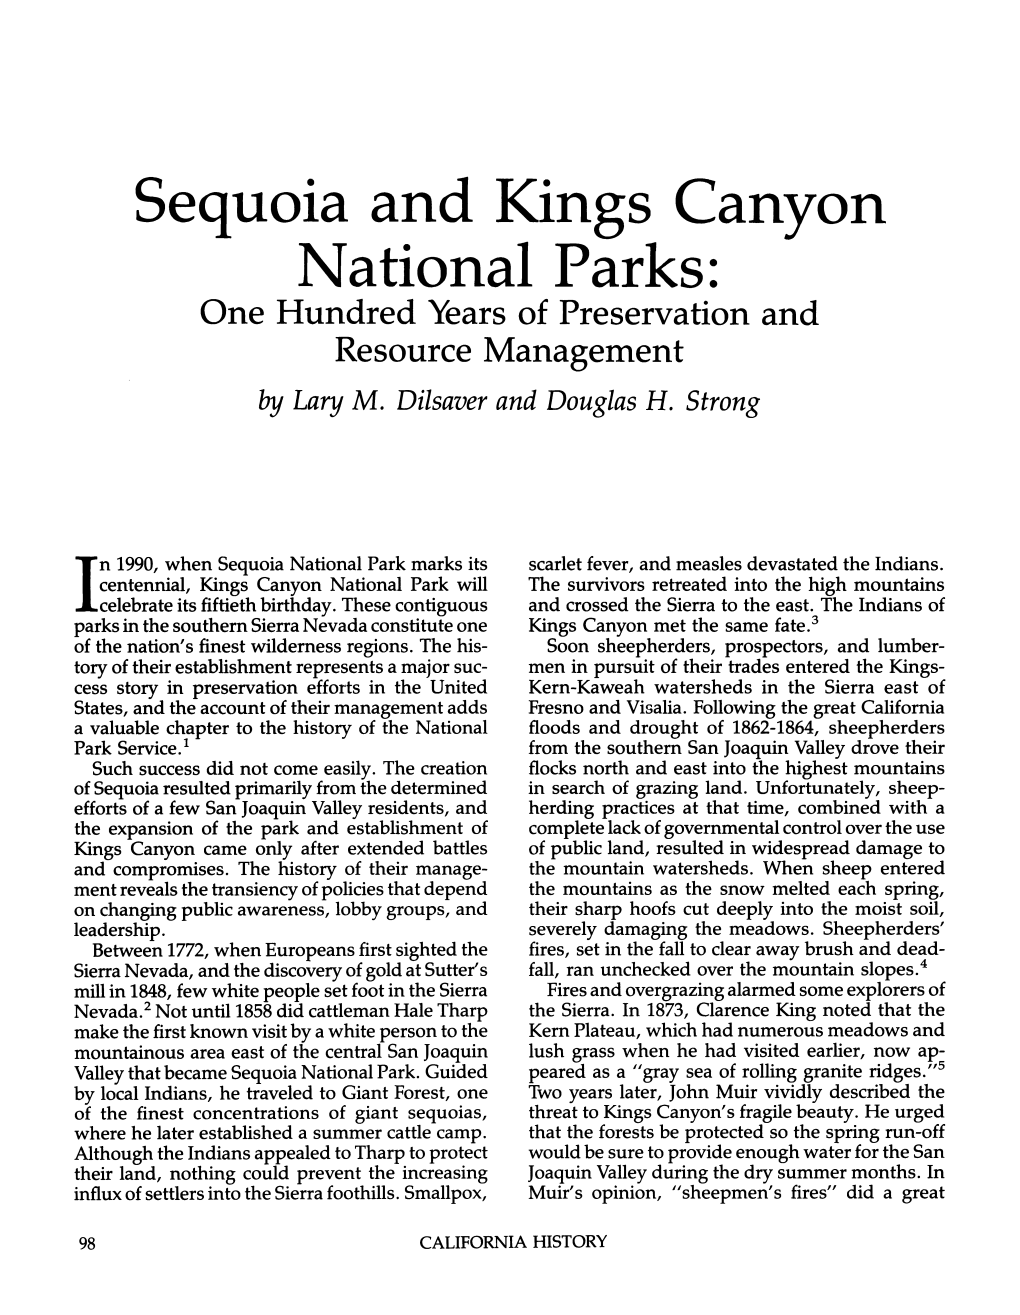 Sequoia and Kings Canyon National Parks: One Hundred Years Of